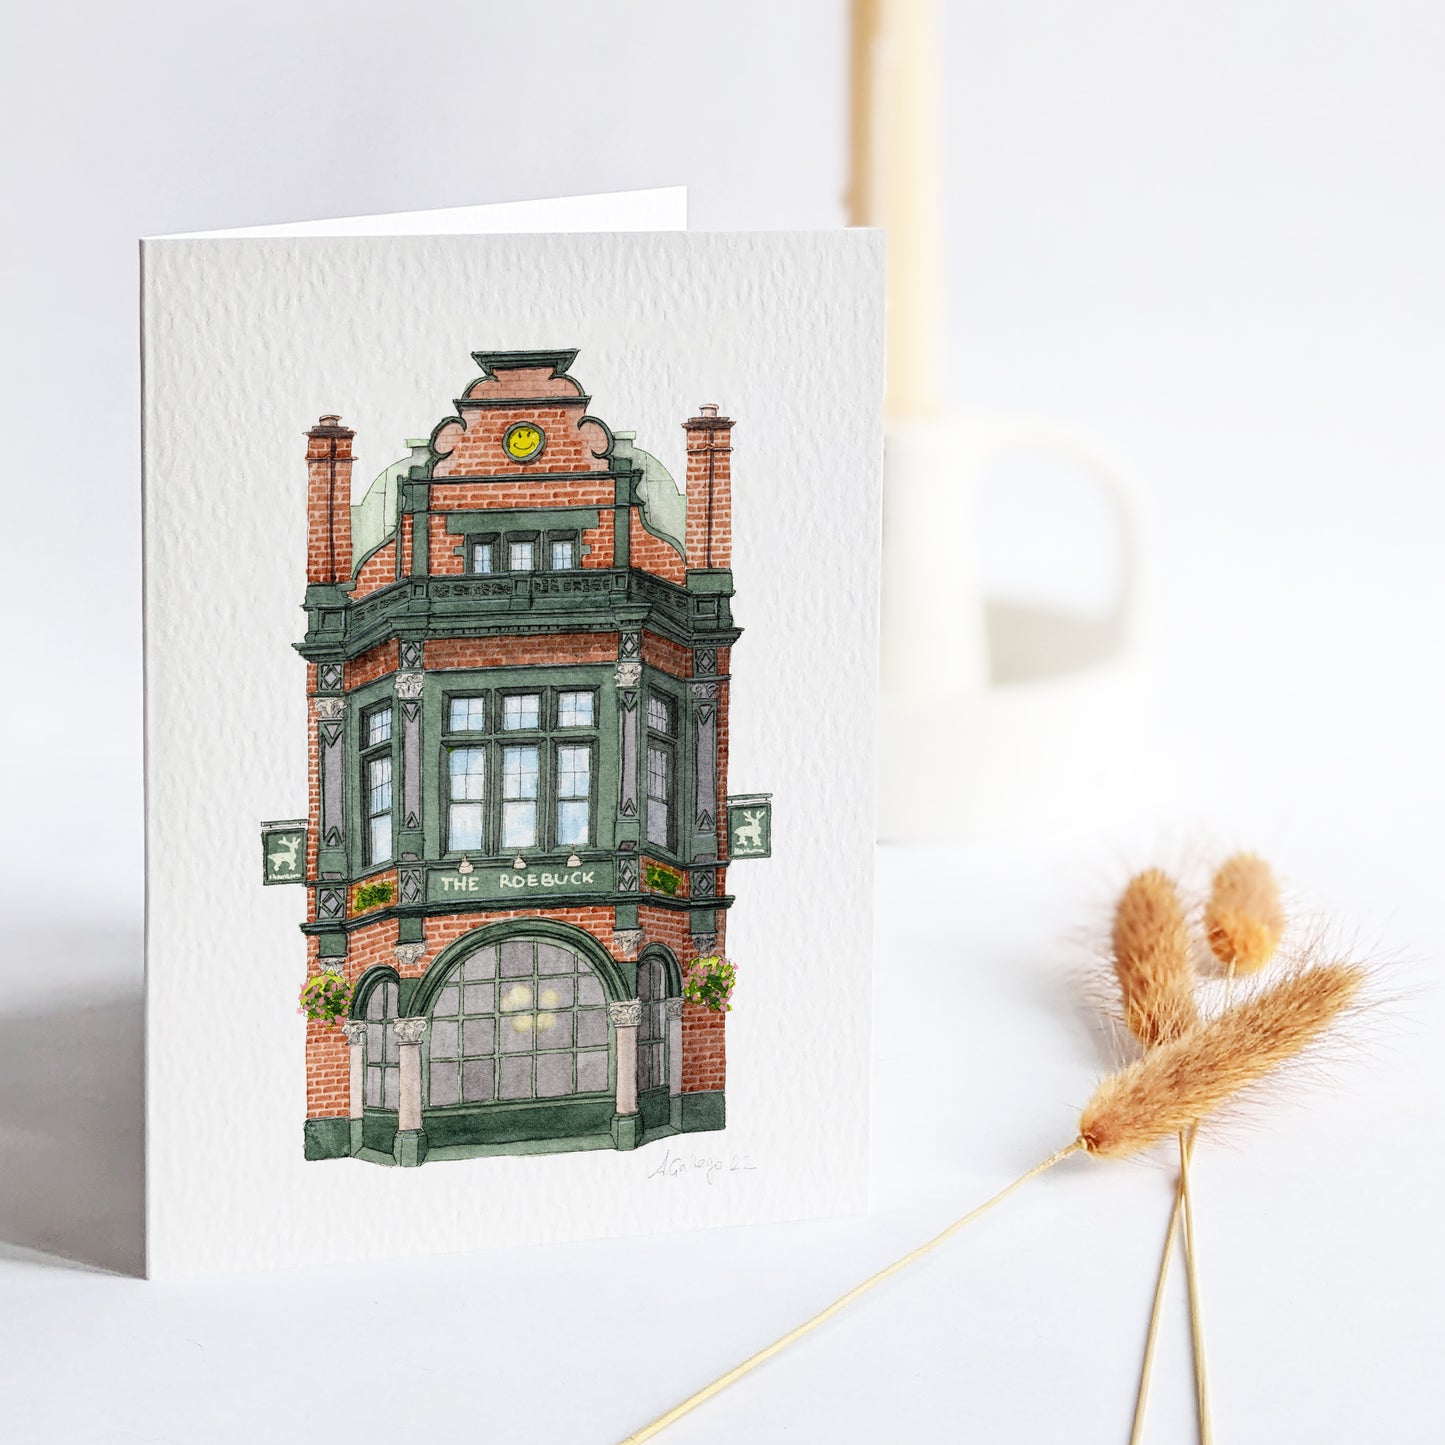 Borough - The Roebuck - Greeting card with envelope